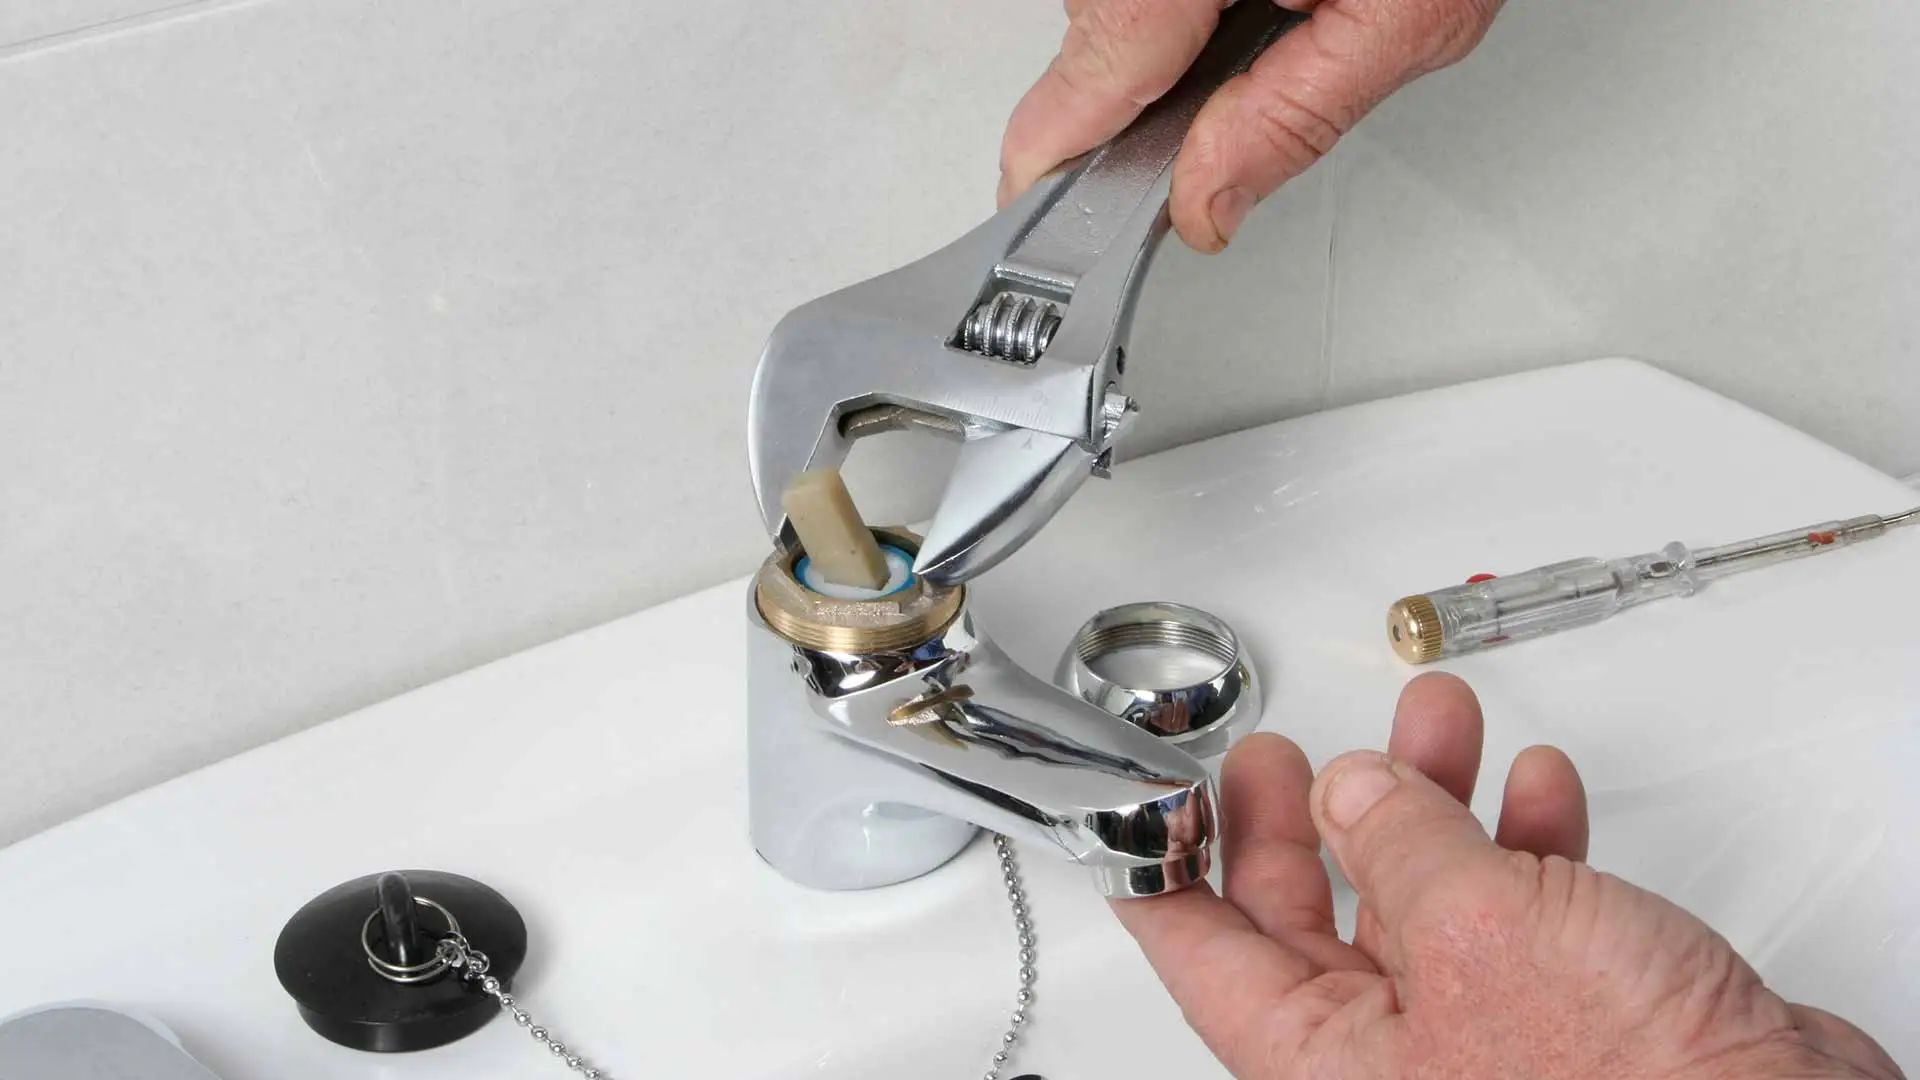 Faucet repair being performed at a home in Wesley Chapel, FL.